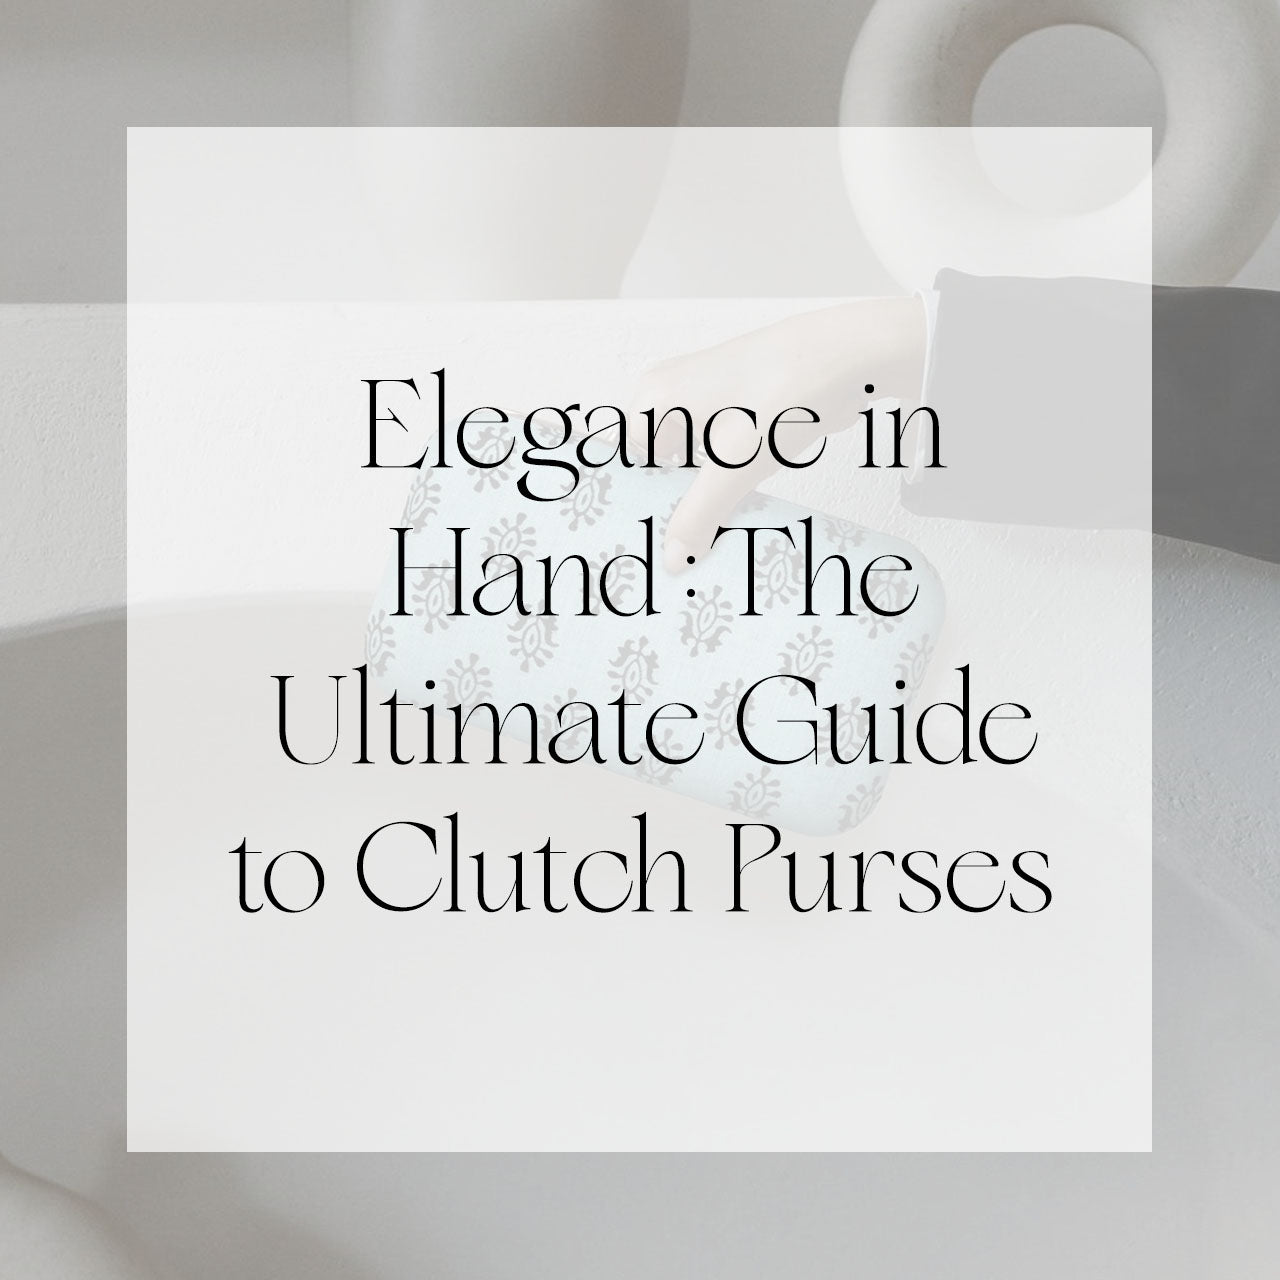 Elegance in Hand: The Ultimate Guide to Clutch Purses